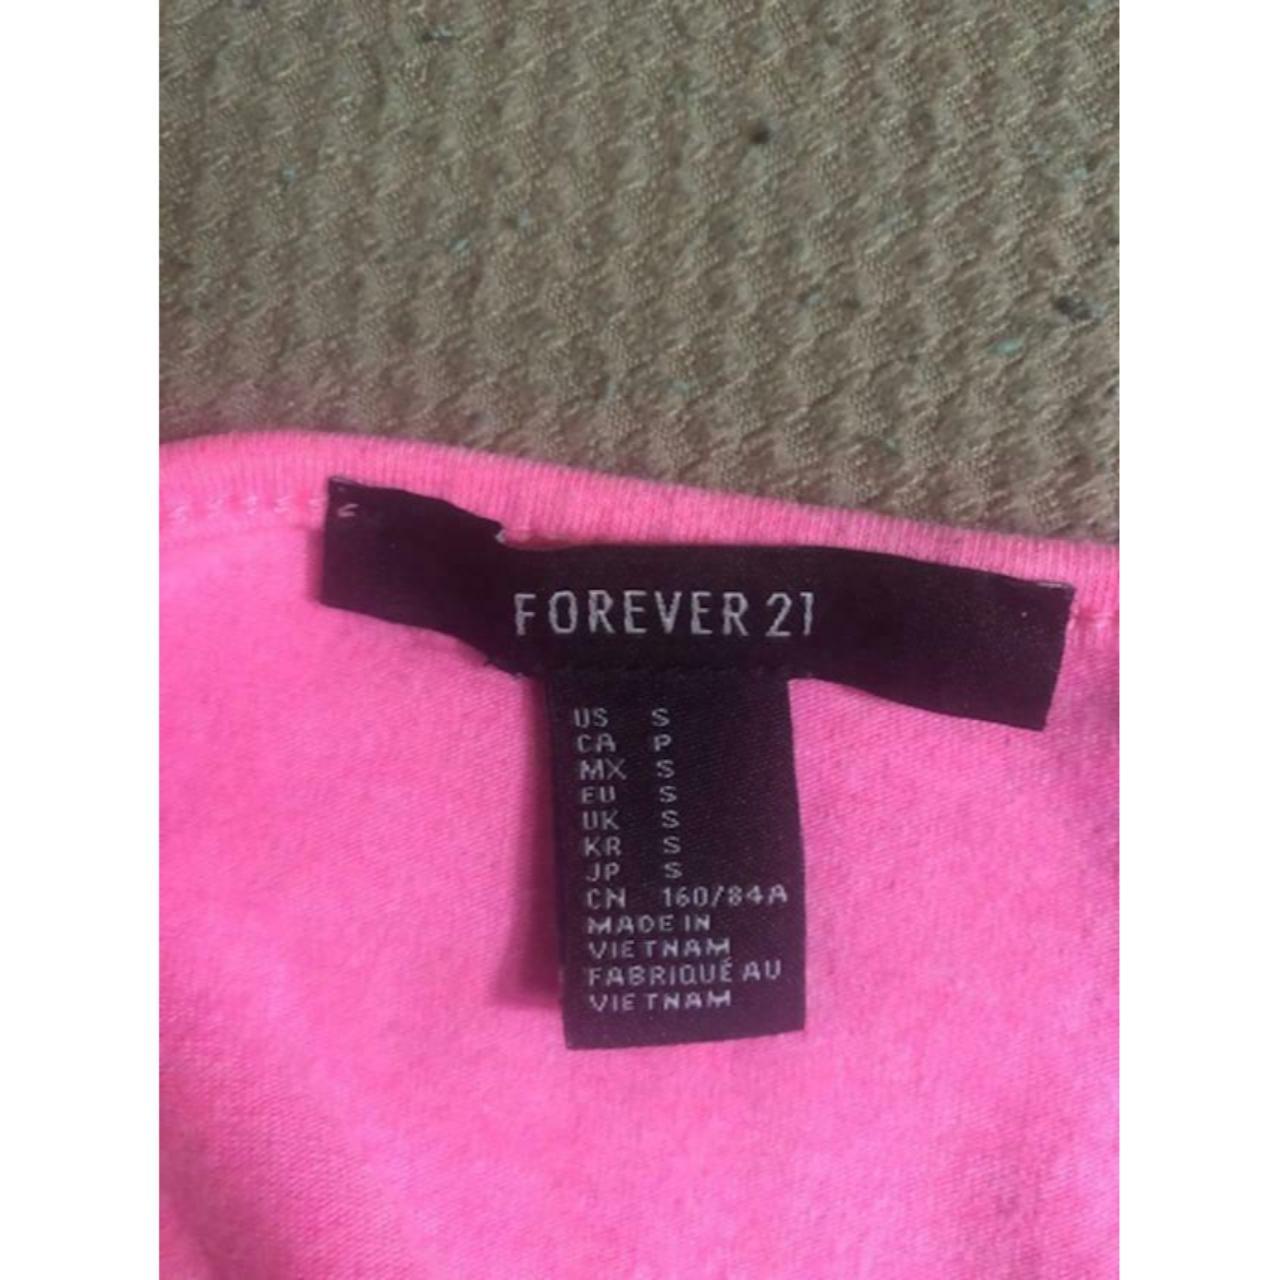 Forever 21 Hot Bright Neon Pink Women's Small... - Depop